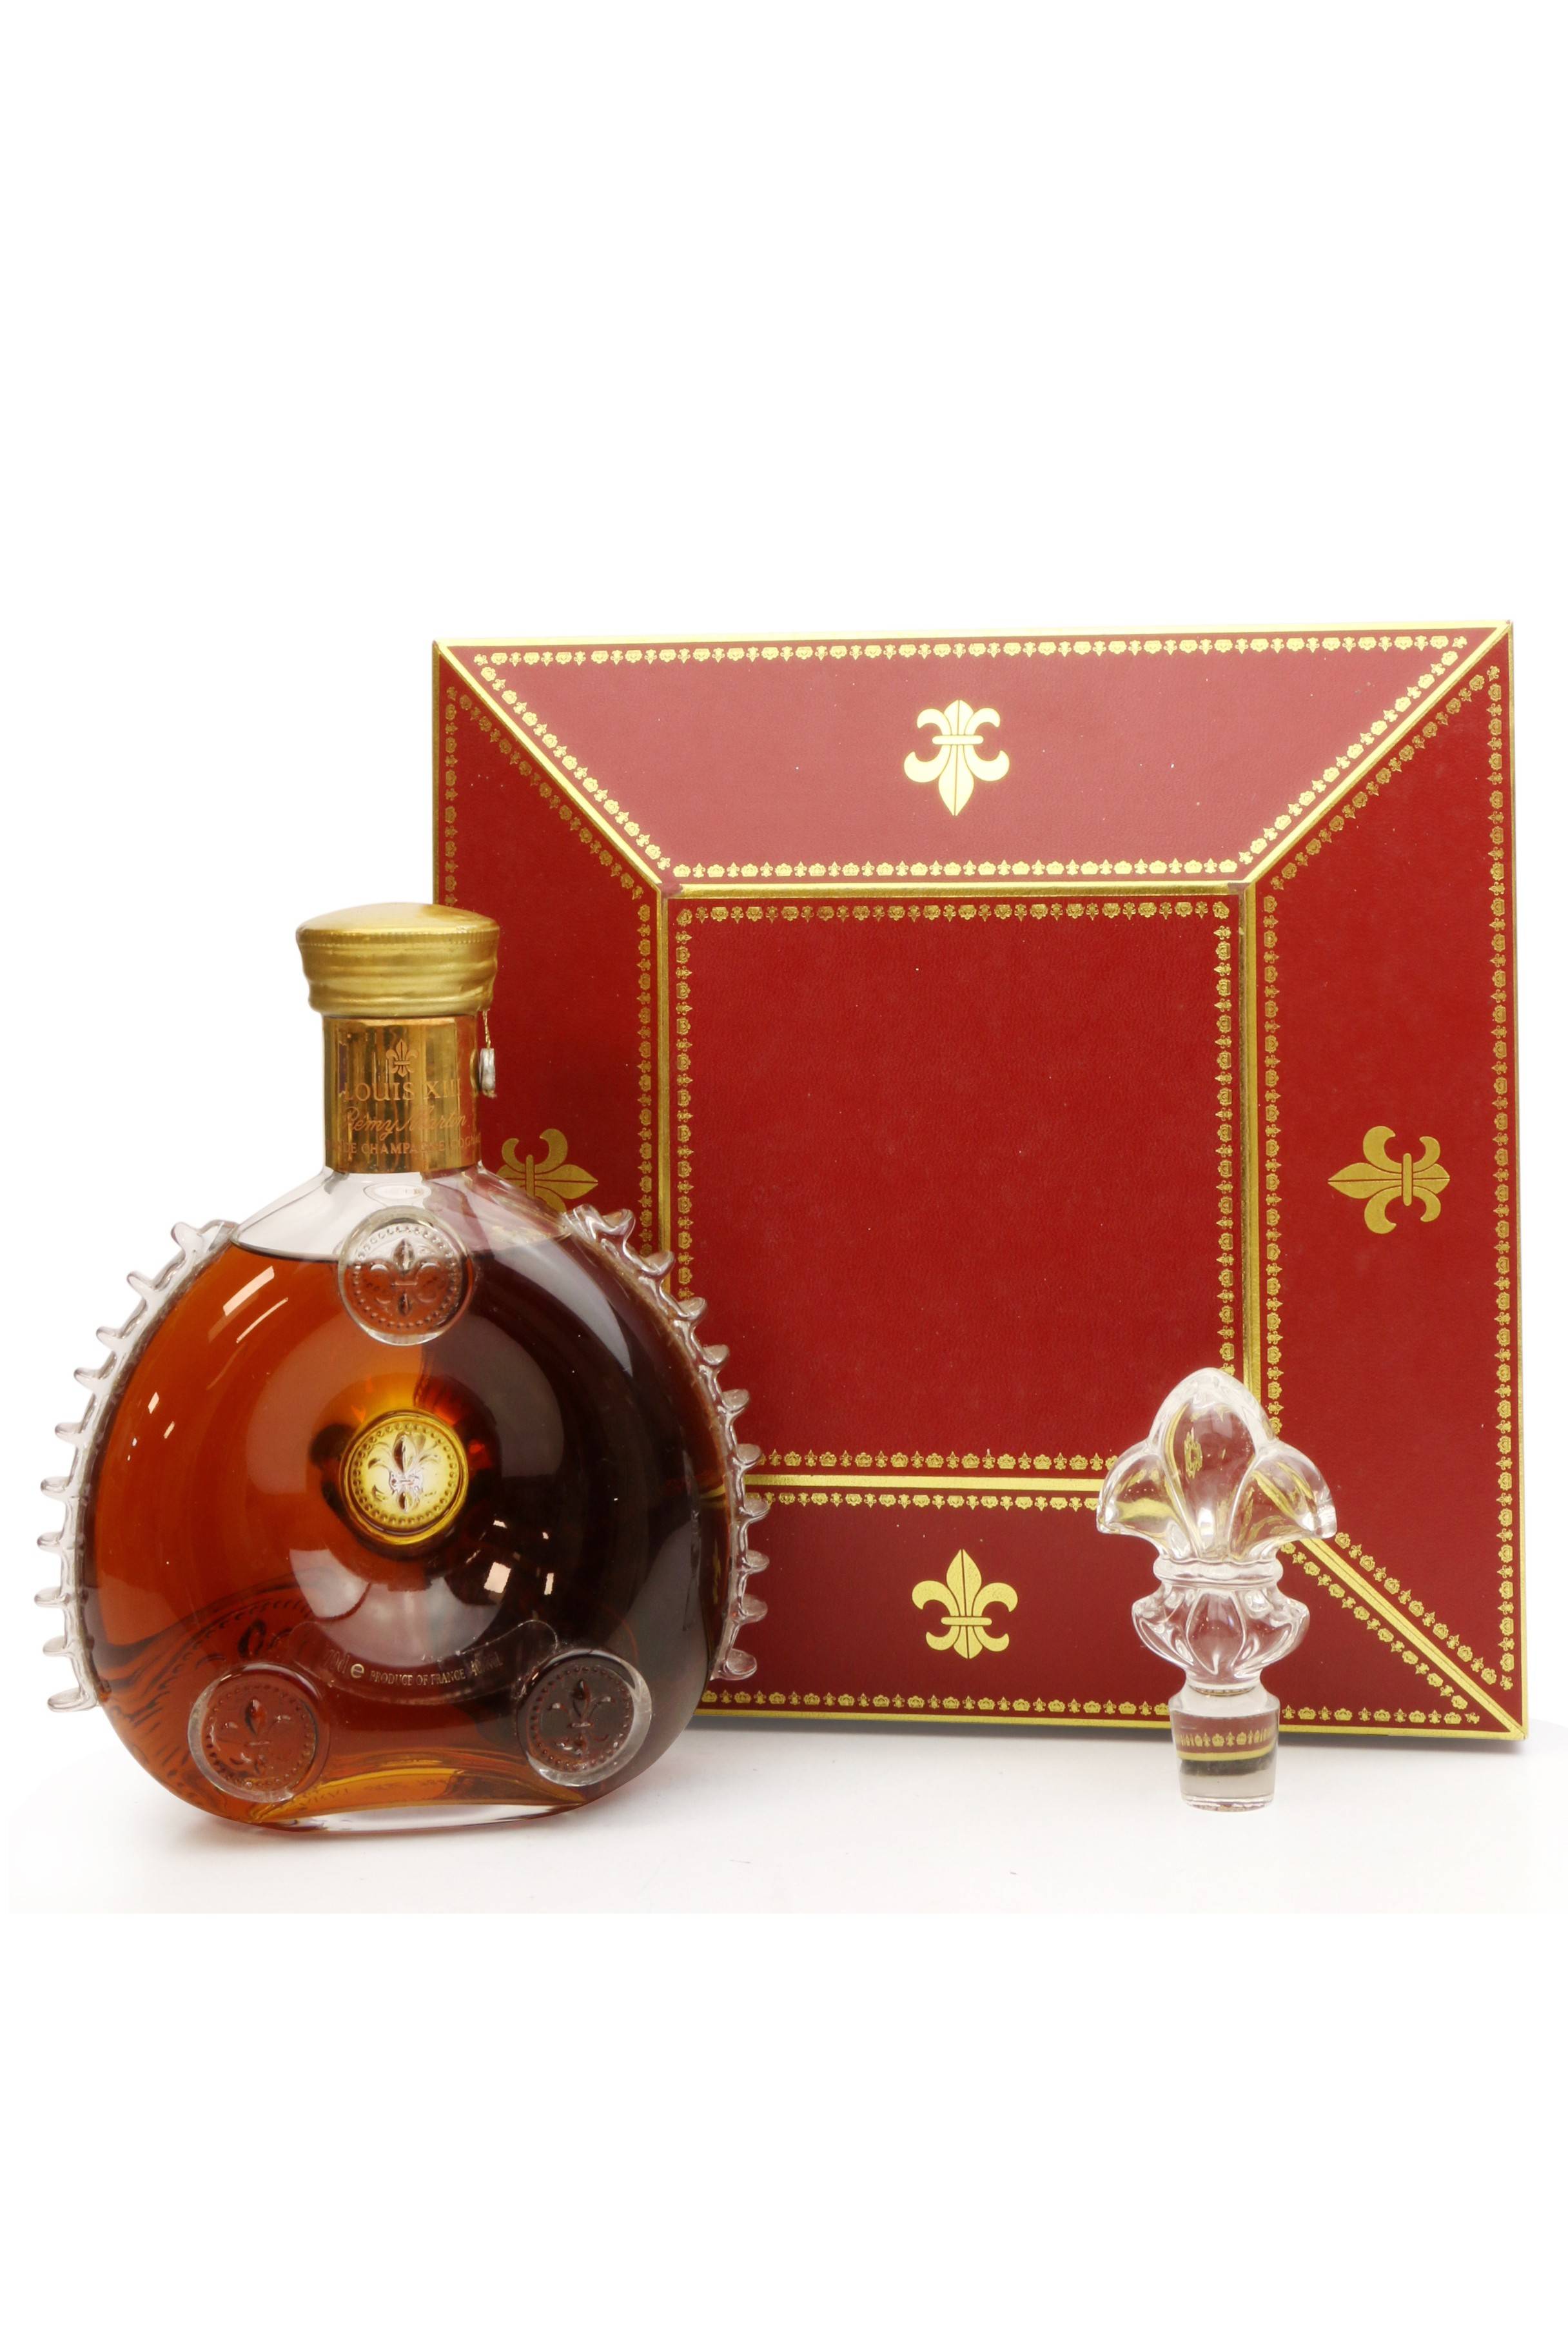 REMY MARTIN LOUIS Xiii Cognac Baccarat Crystal Decanter Bottle